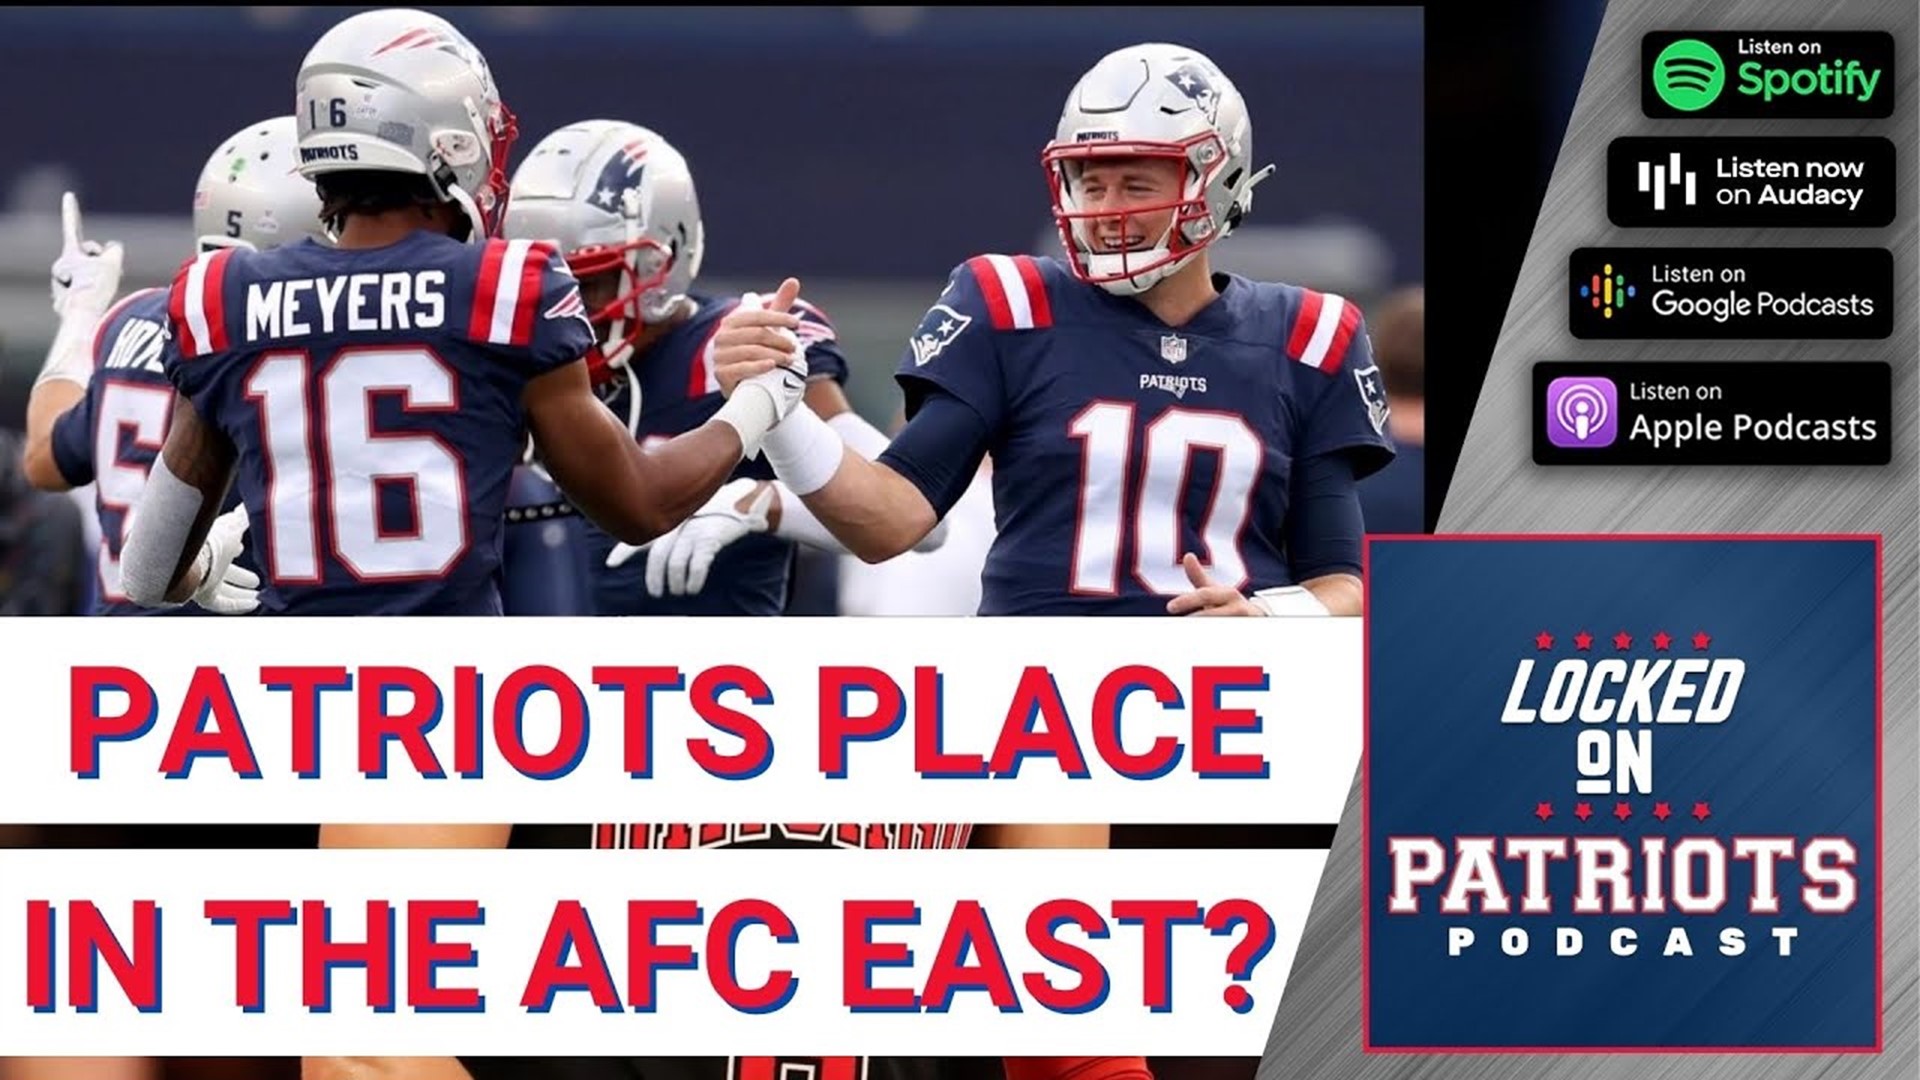 The New England Patriots overcame a 2-4 start to the 2021 NFL season, to finish with a 10-7 record and earned a playoff berth after a one-year absence.